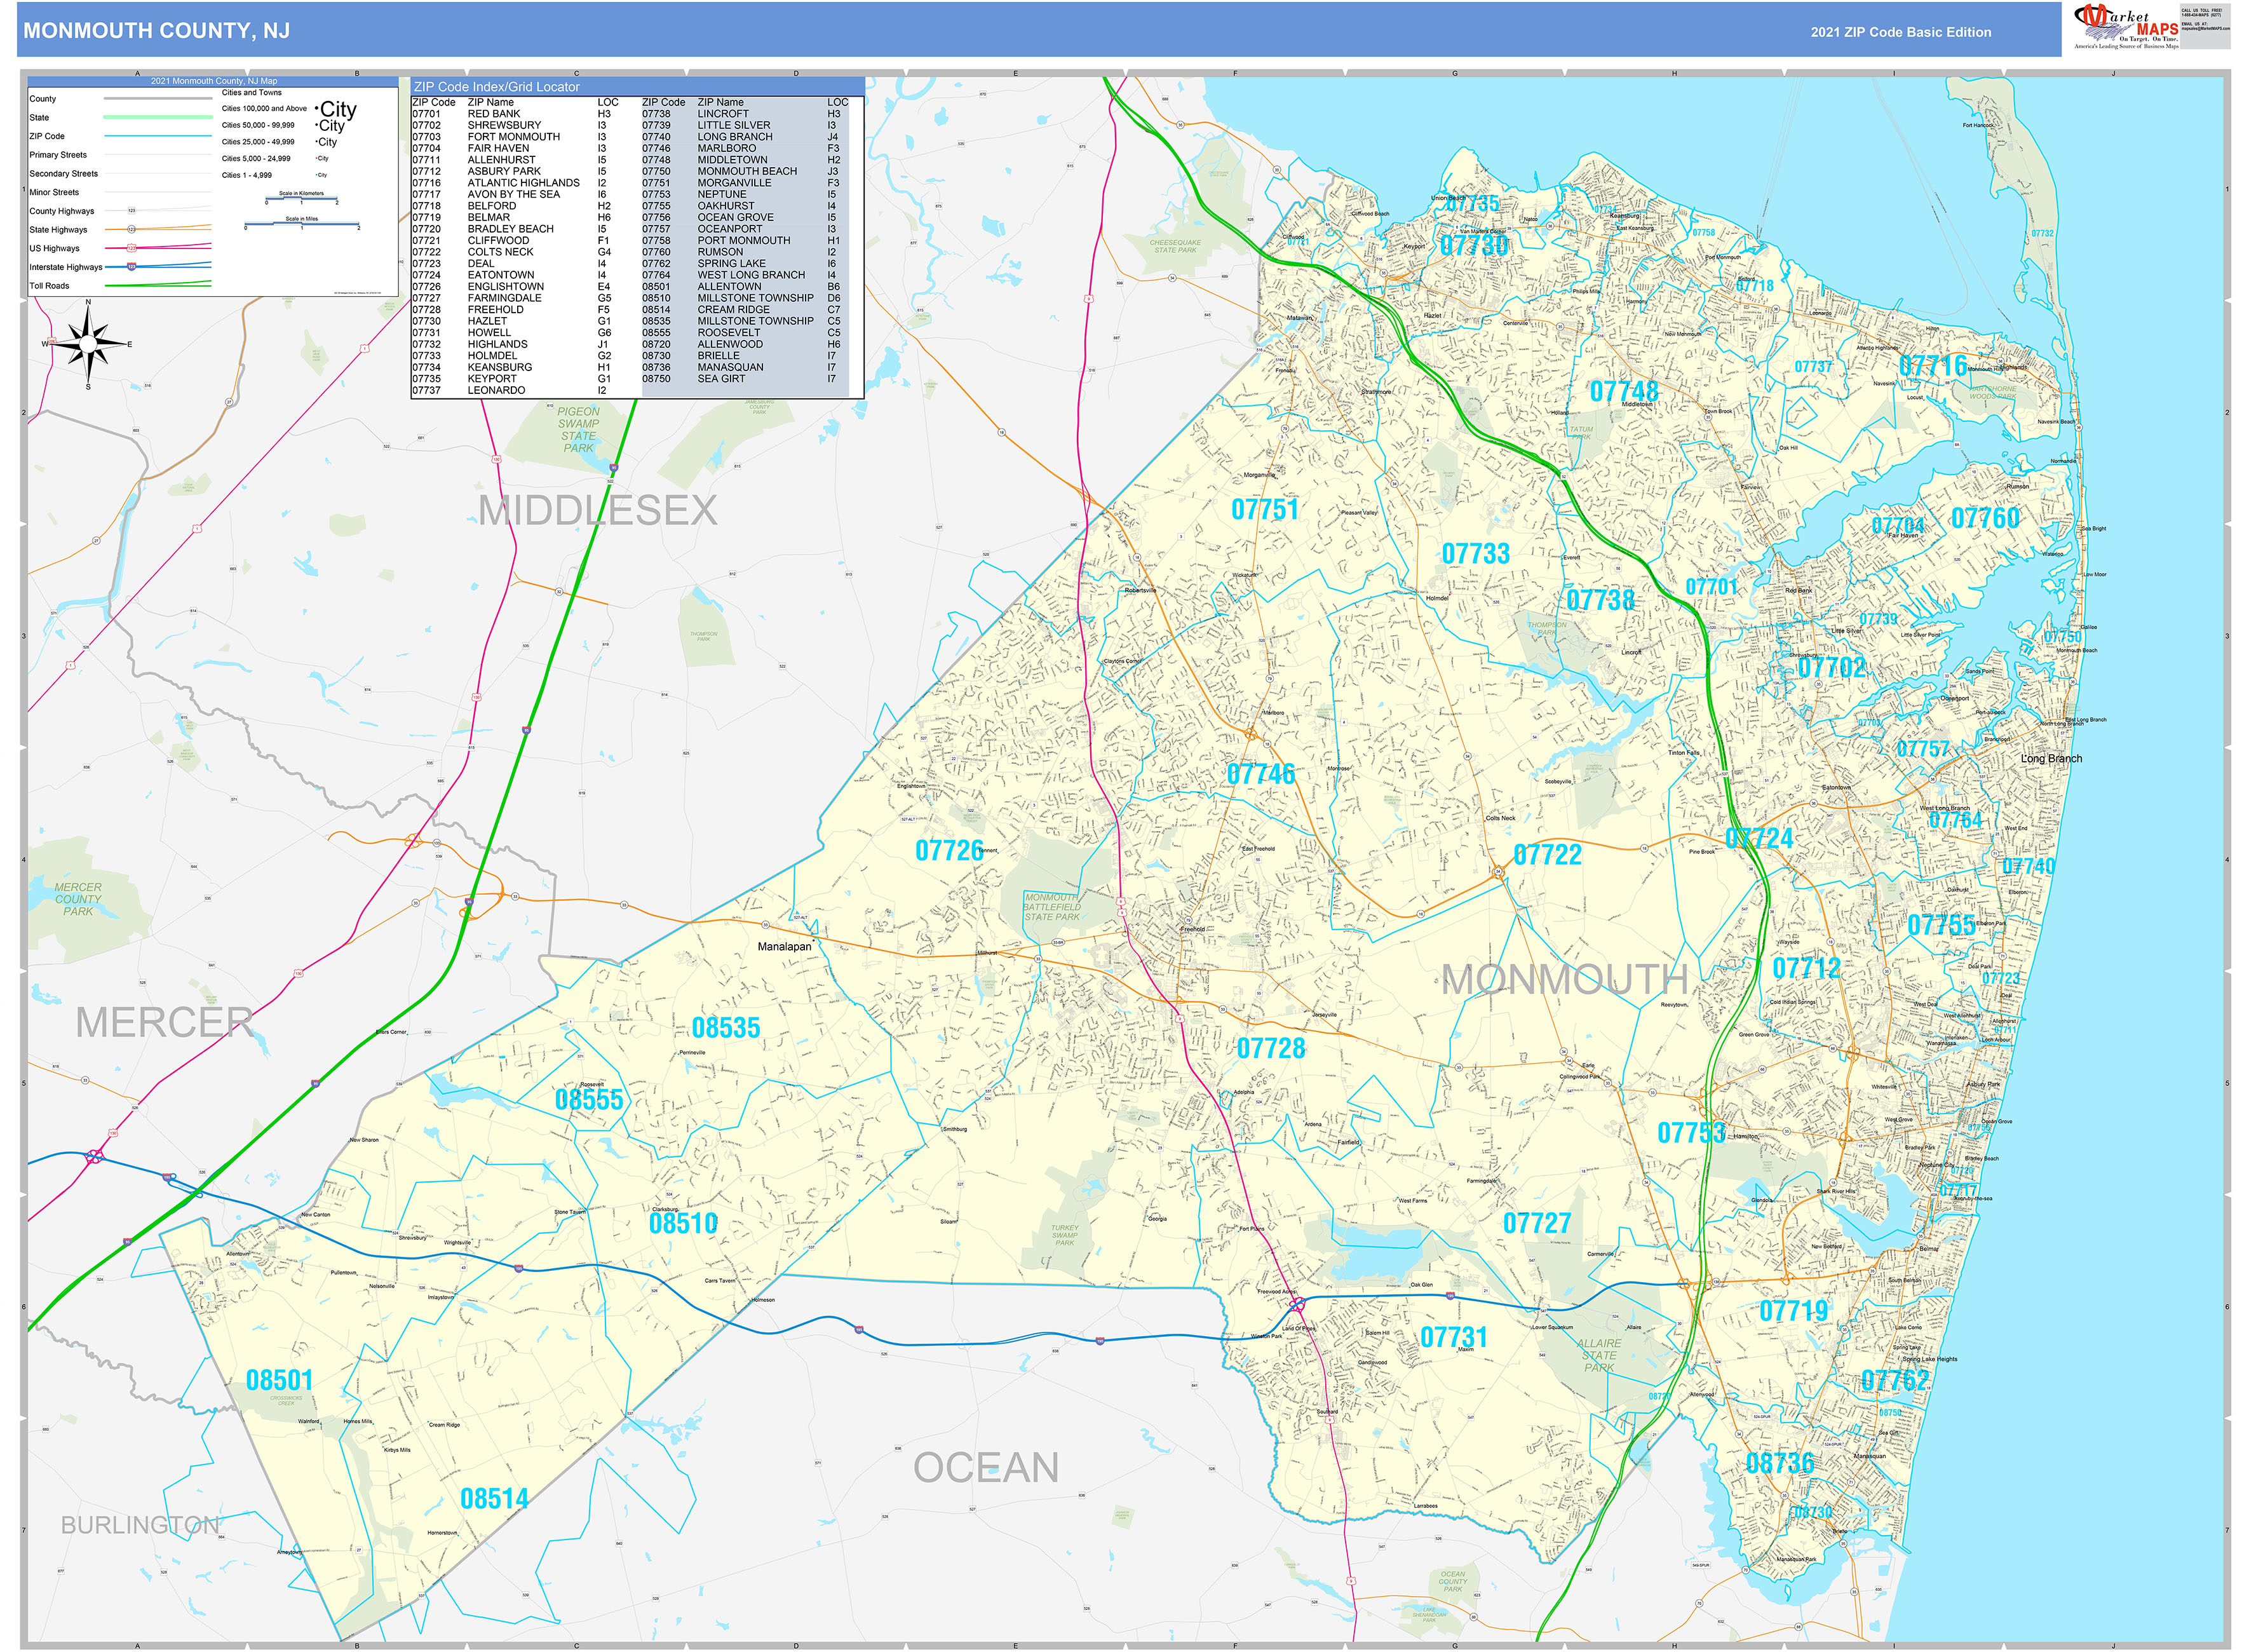 Monmouth County, NJ Zip Code Wall Map Basic Style by MarketMAPS - MapSales